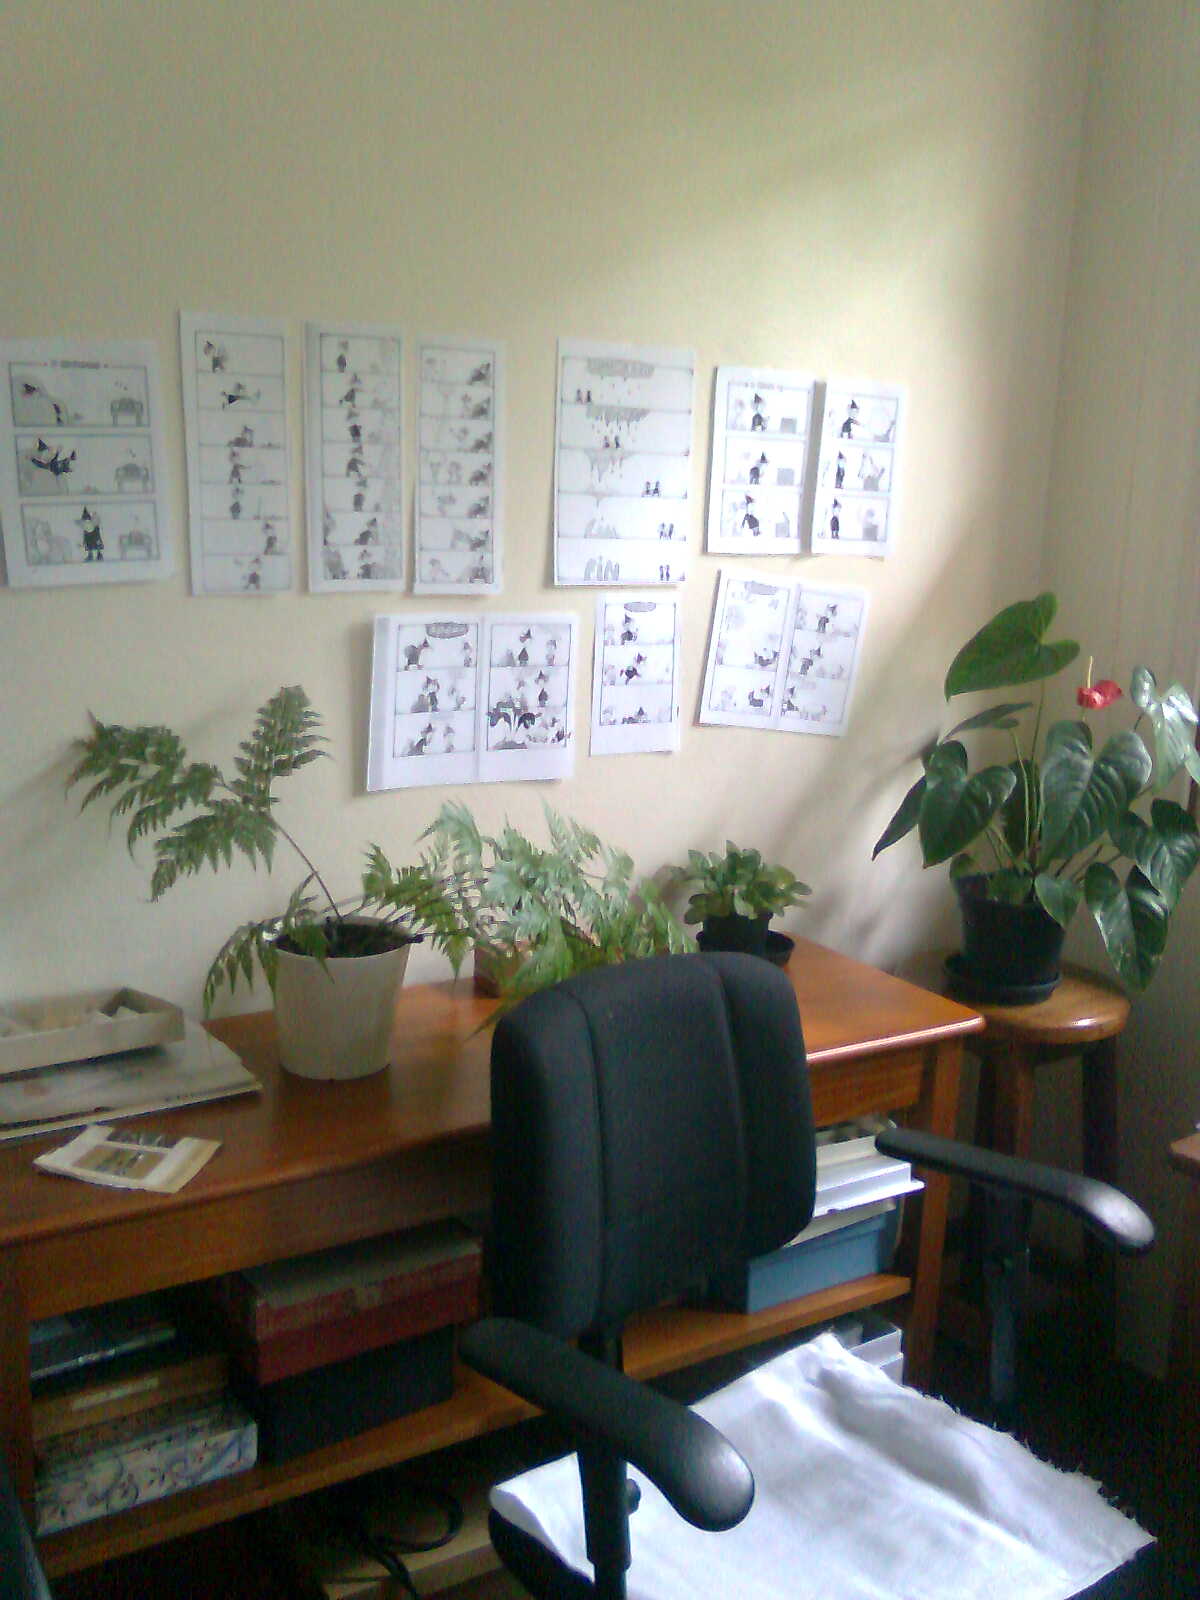 This is Eva’s studio. To write, there’s silence; to draw, usually a radio playing classical music or an interview program.